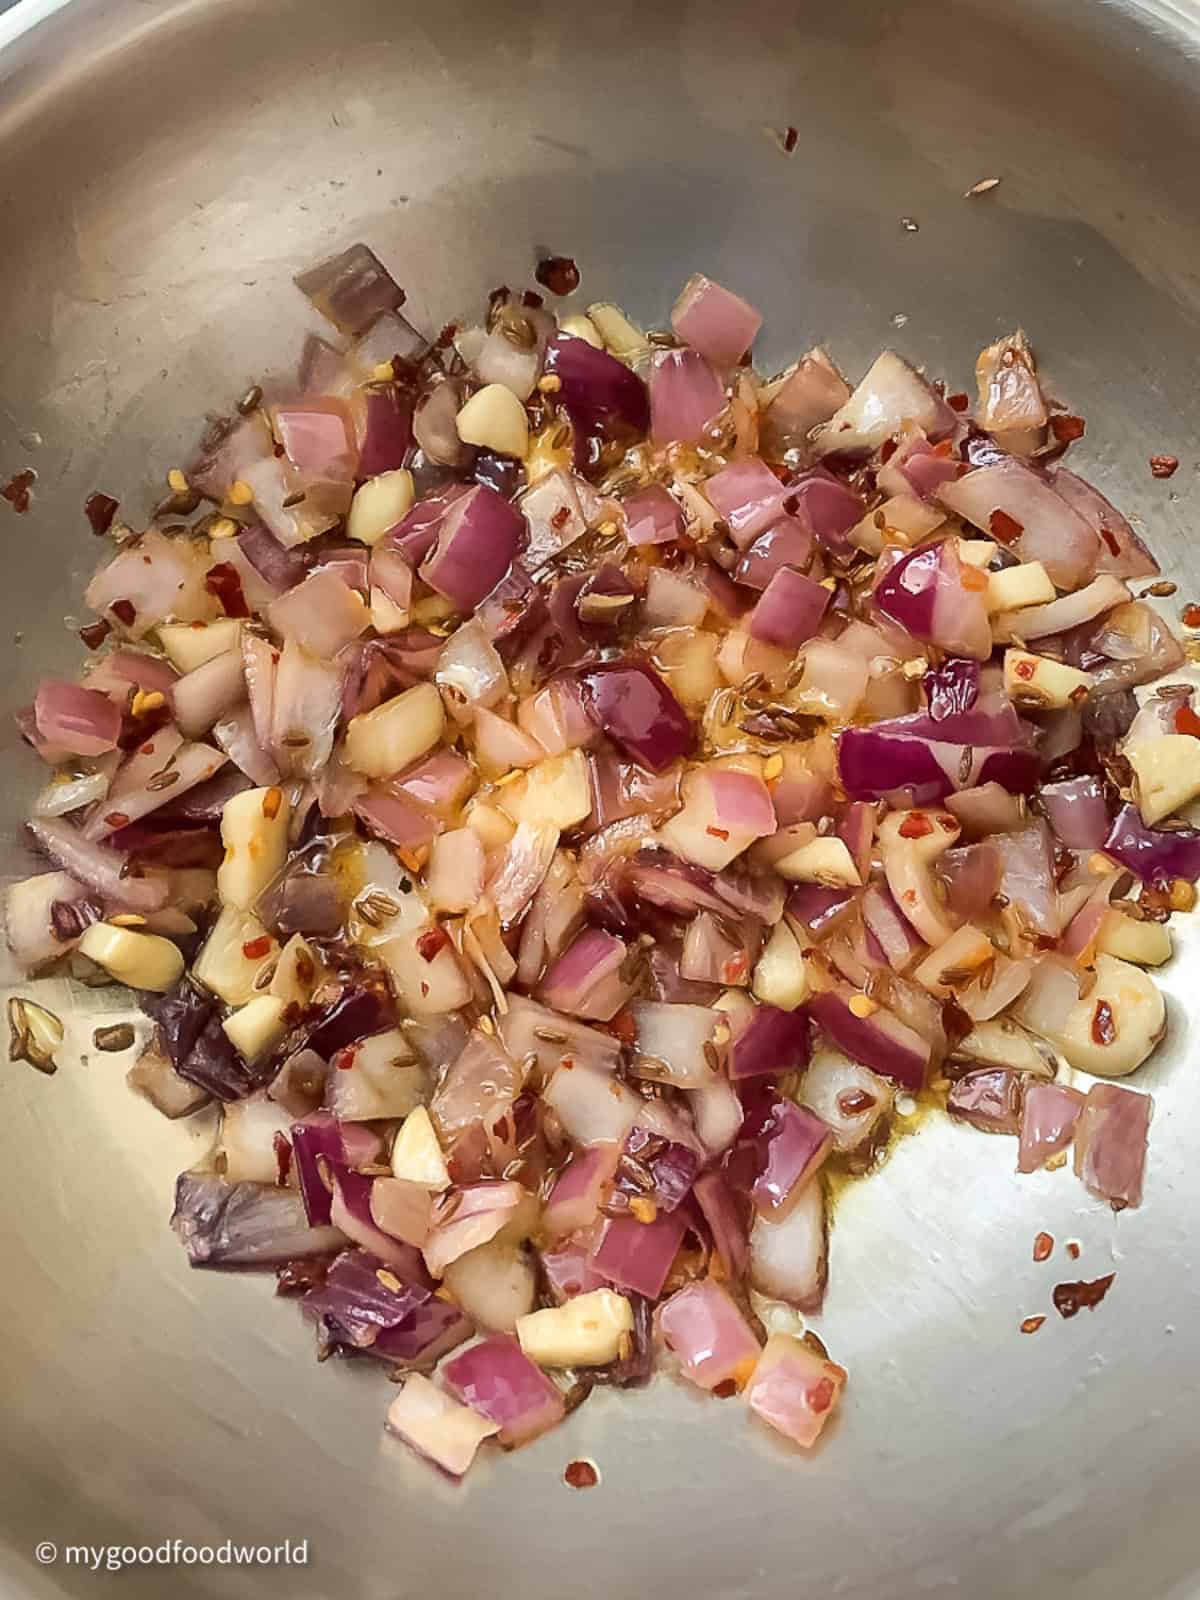 Diced onion and garlic are frying in oil along with some cumin seeds and red pepper flakes.